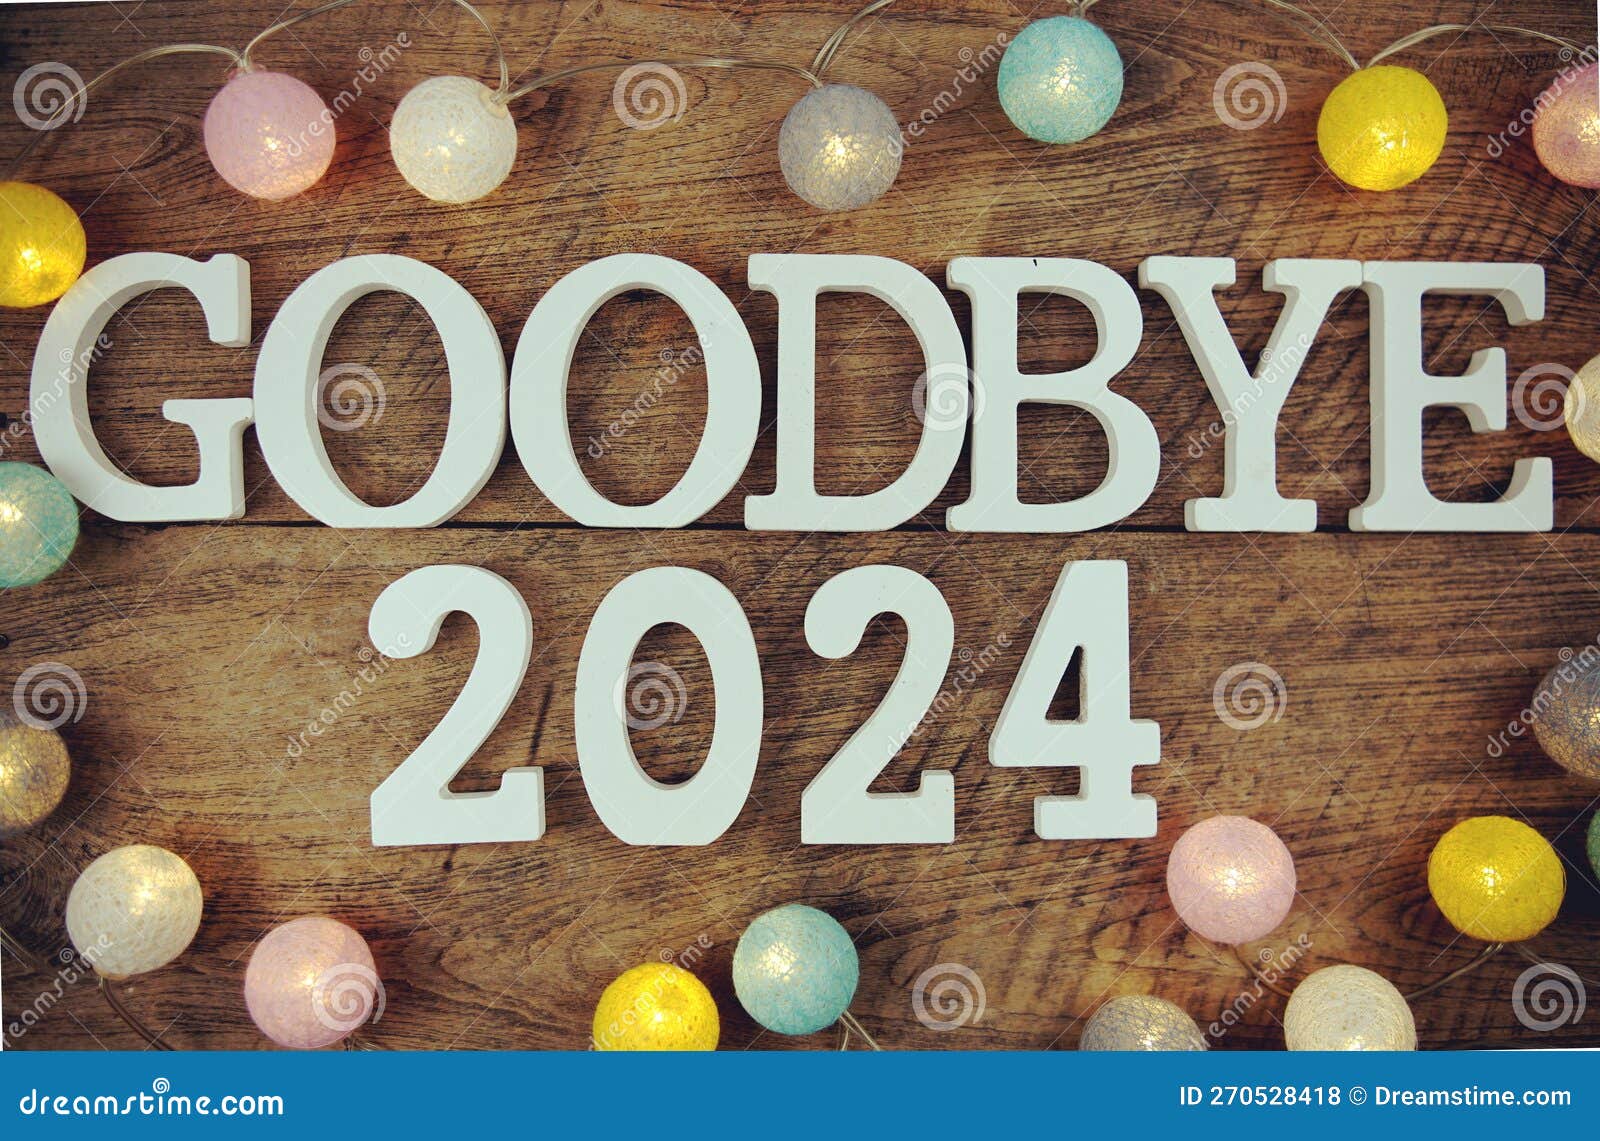 Goodbye 2024 Alphabet Letters and LED Cotton Ball Decoration on Wooden